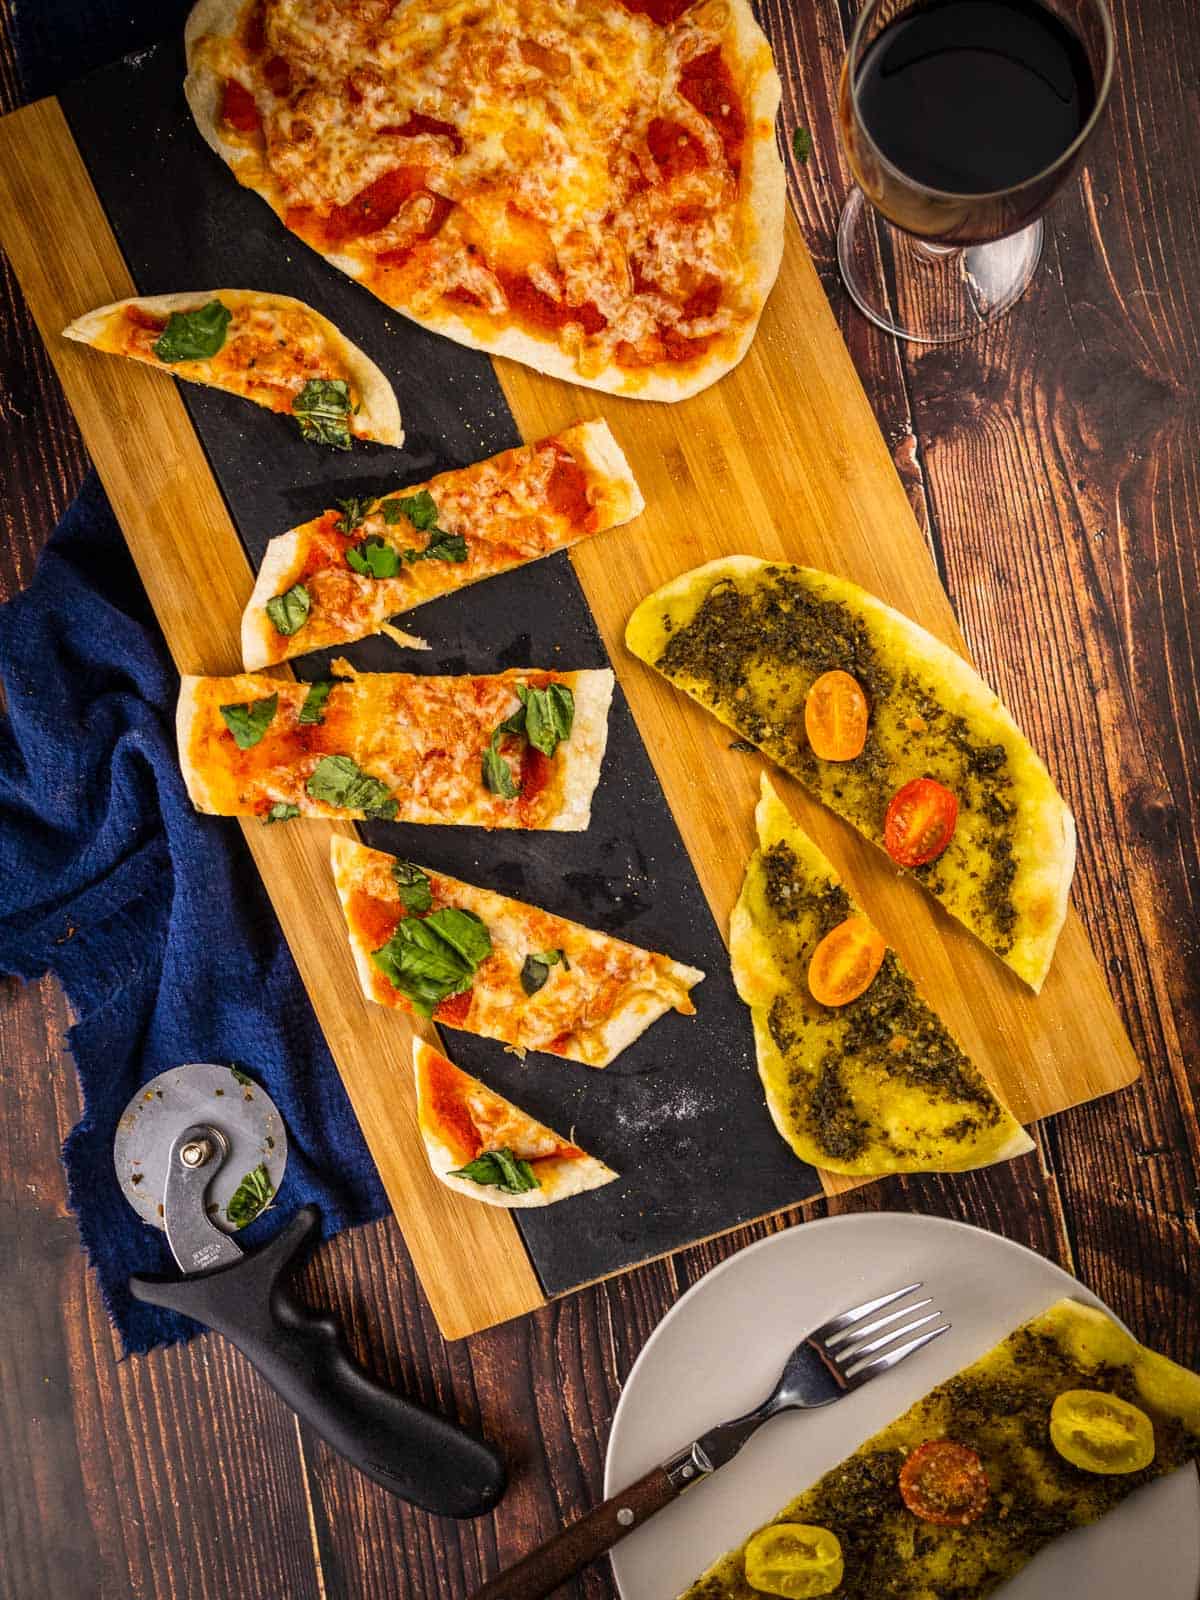 Sliced italian flatbread pizza on a wooden tray with a glass of wine next to it.